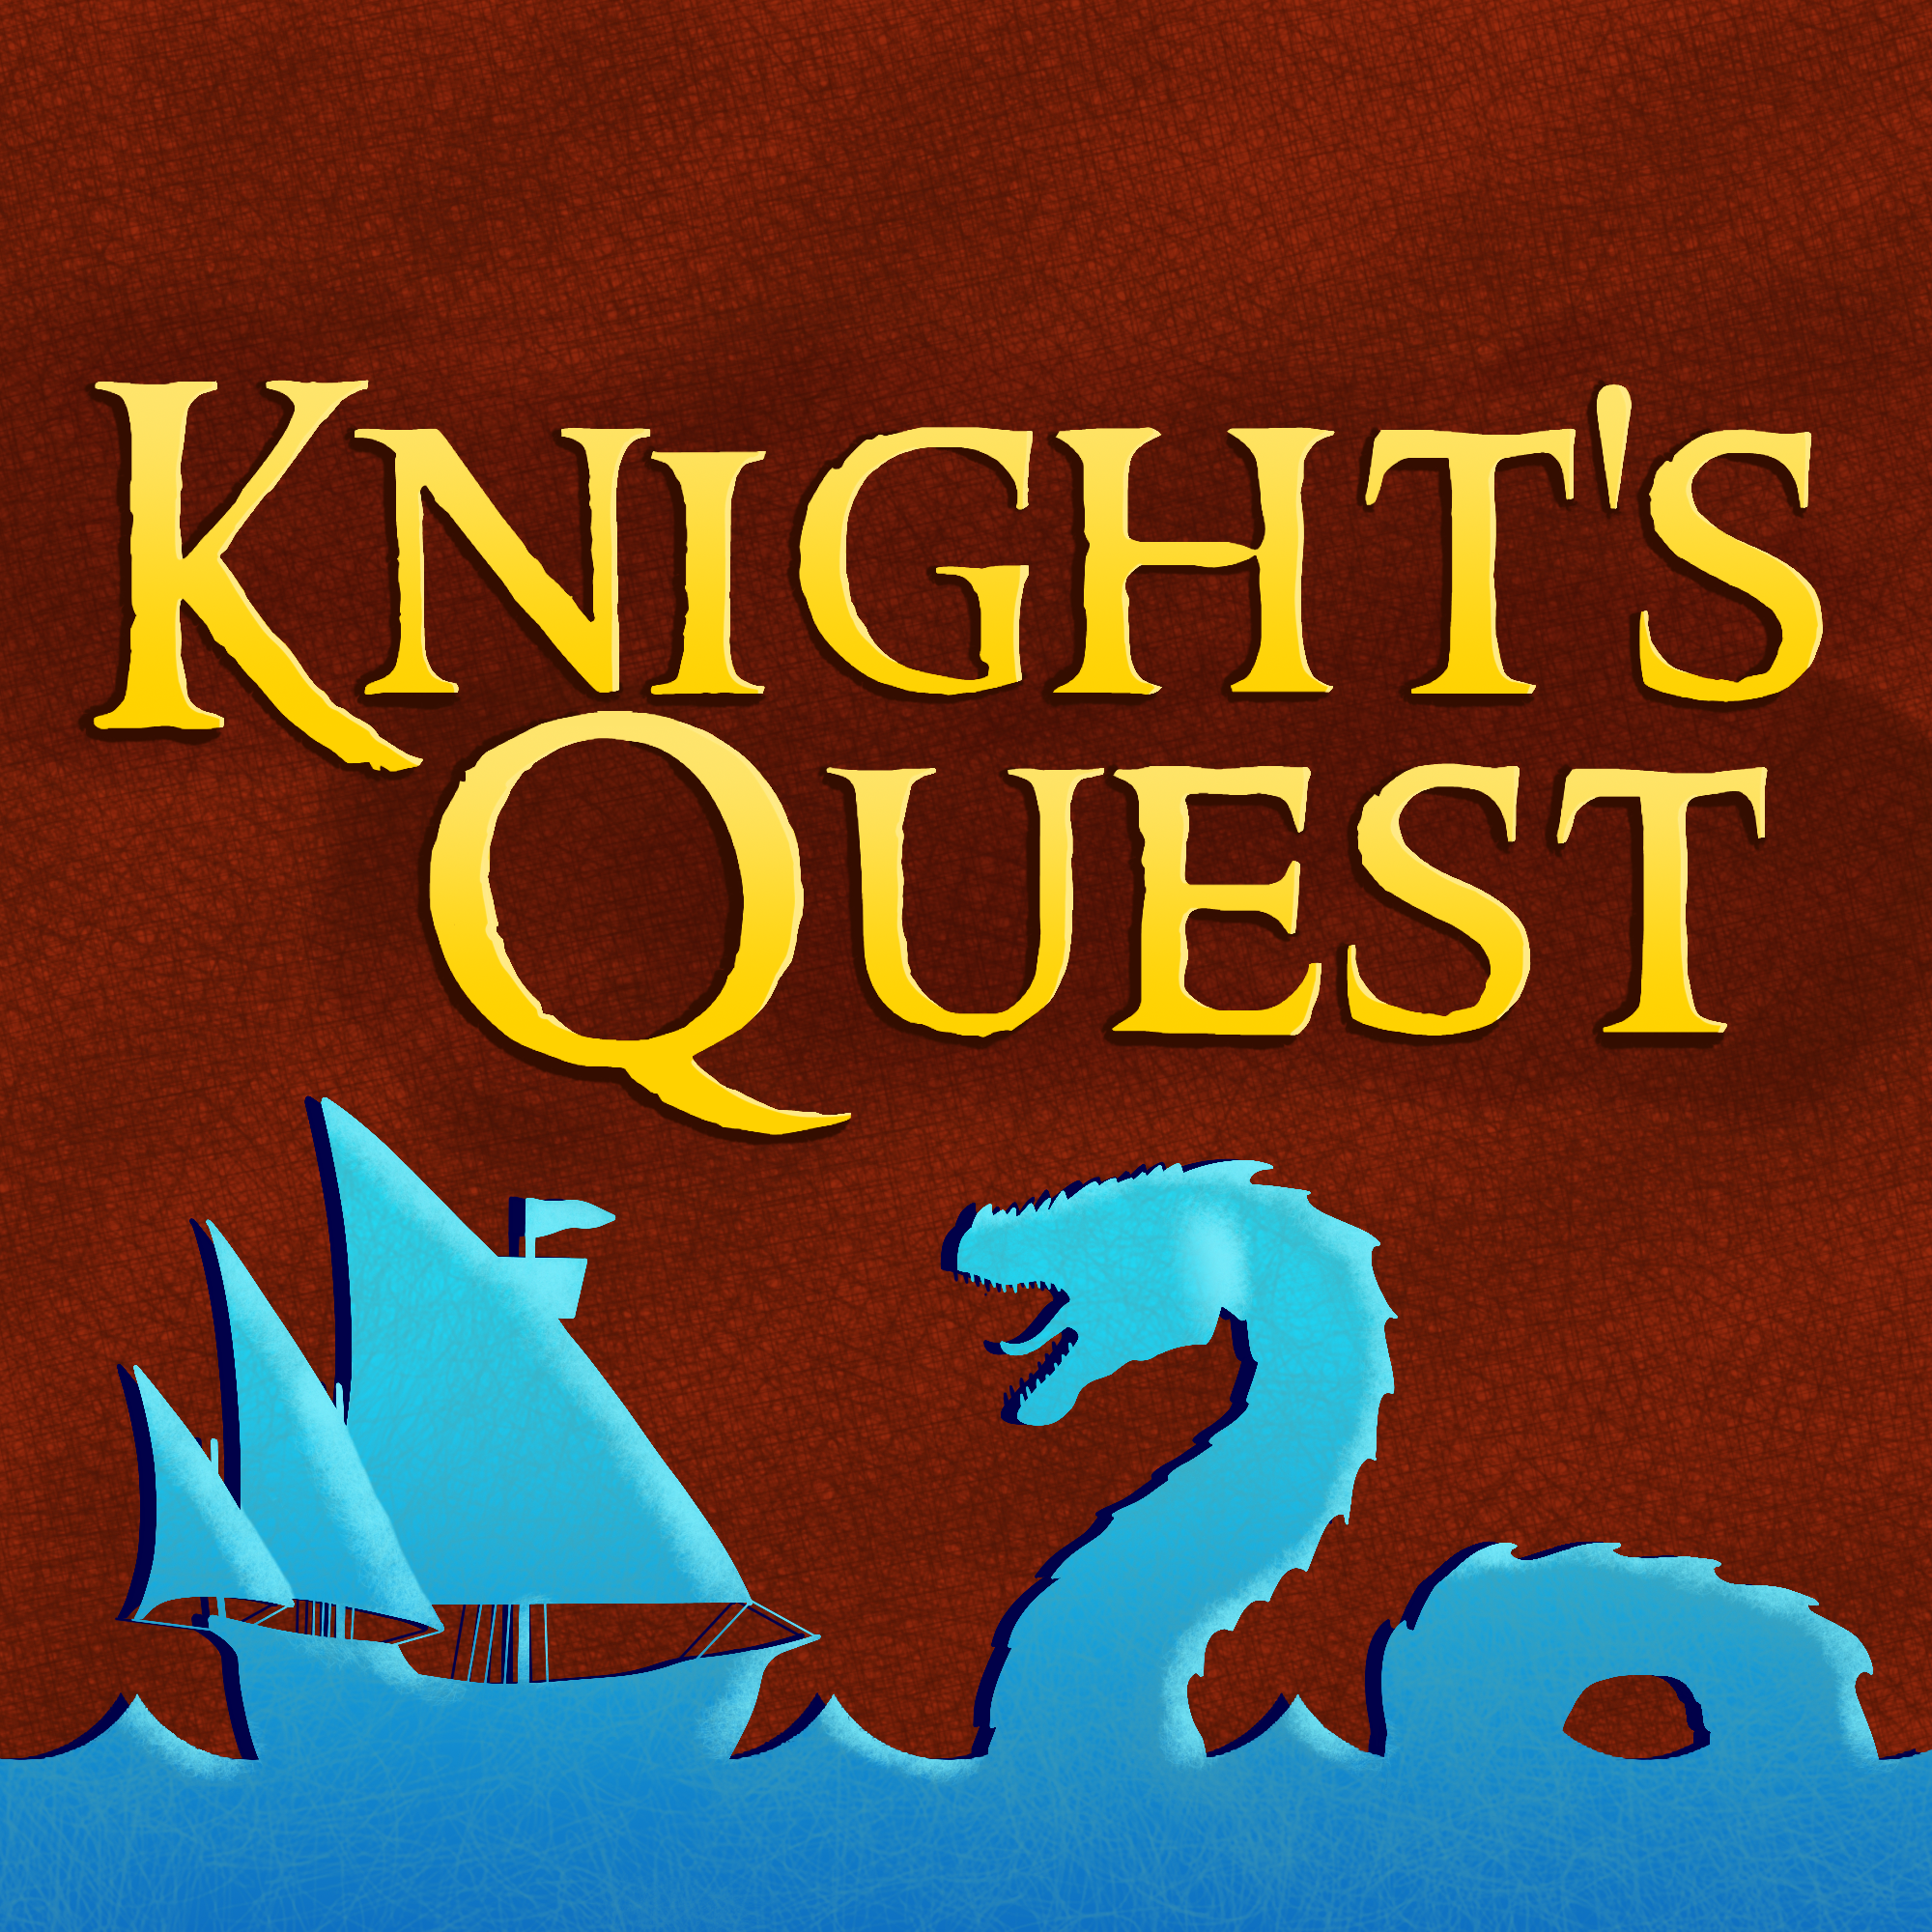 Goodbye from Knight's Quest